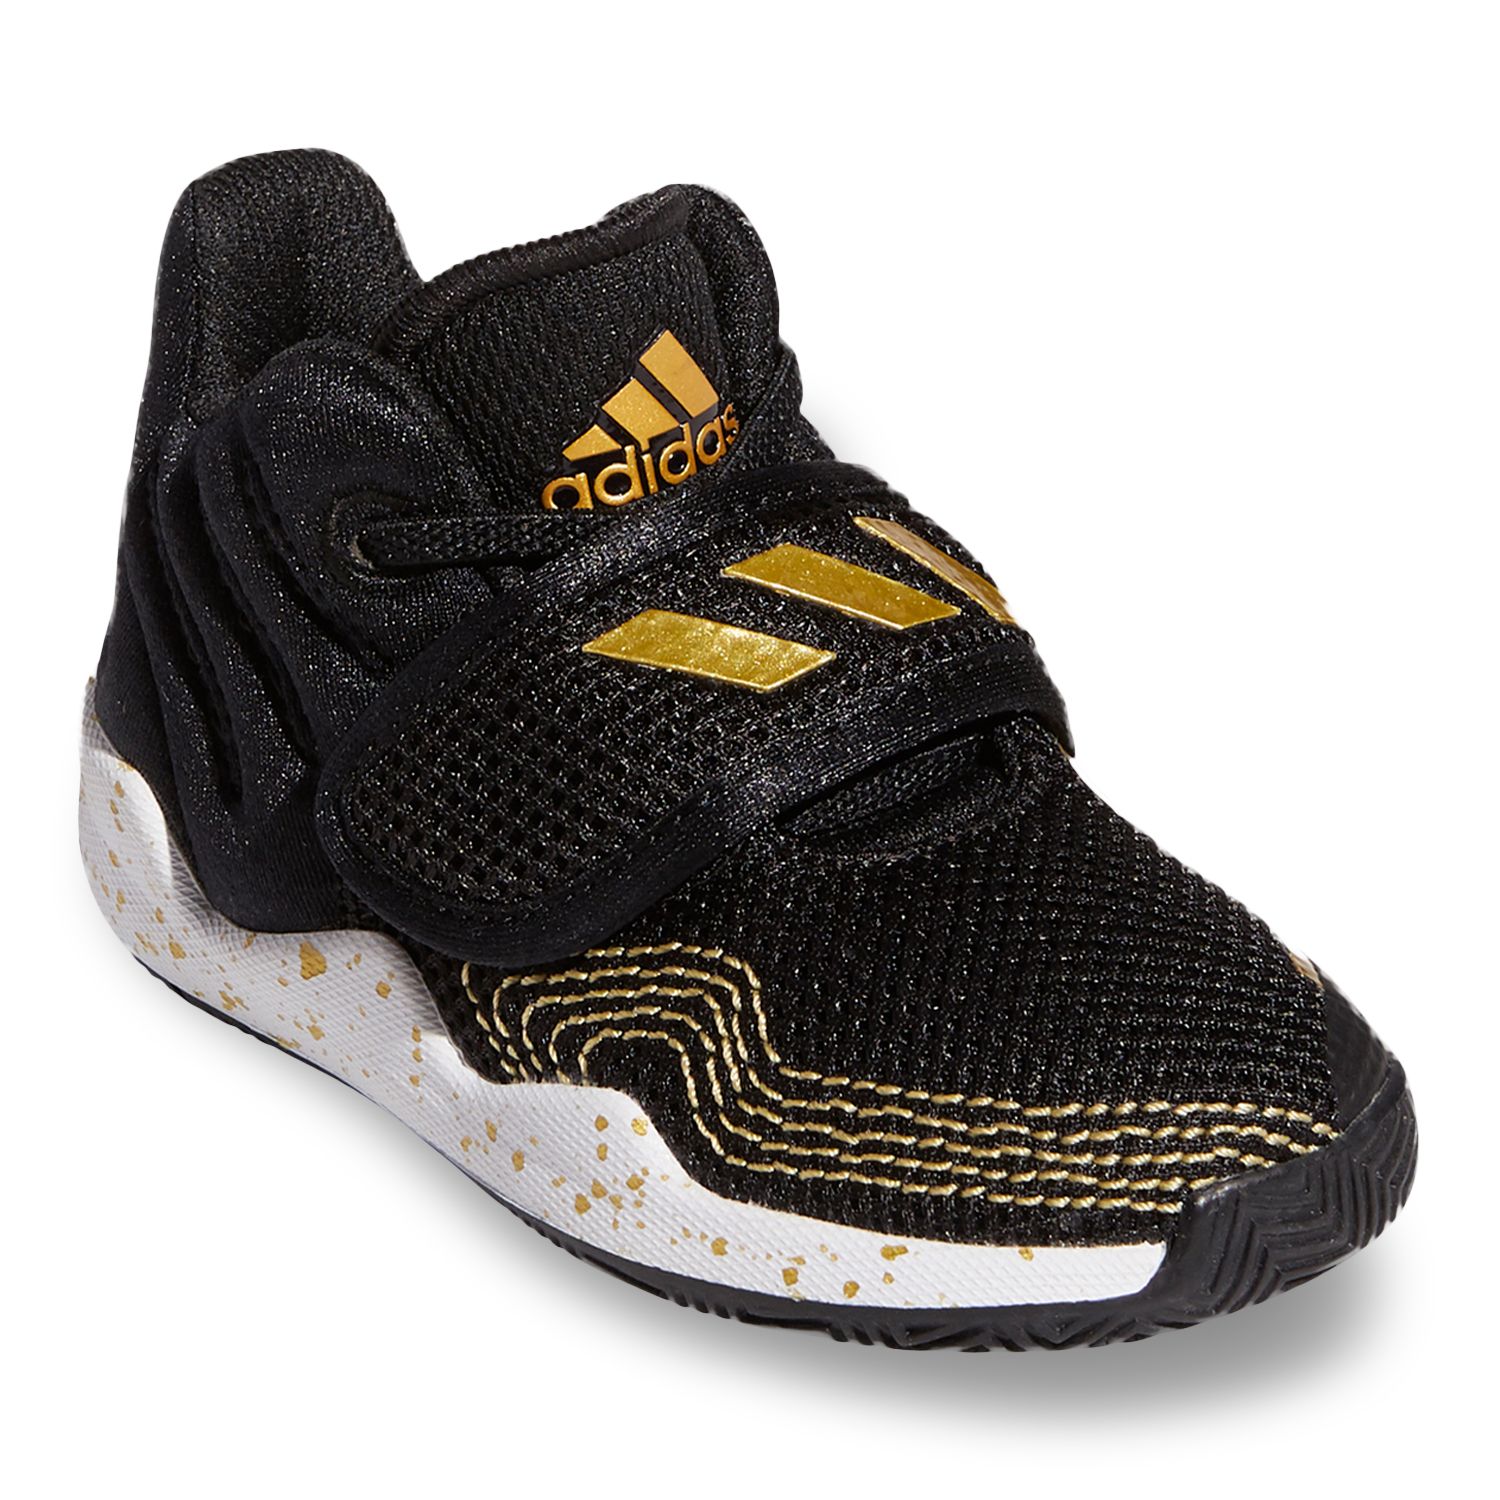 adidas toddler wide shoes